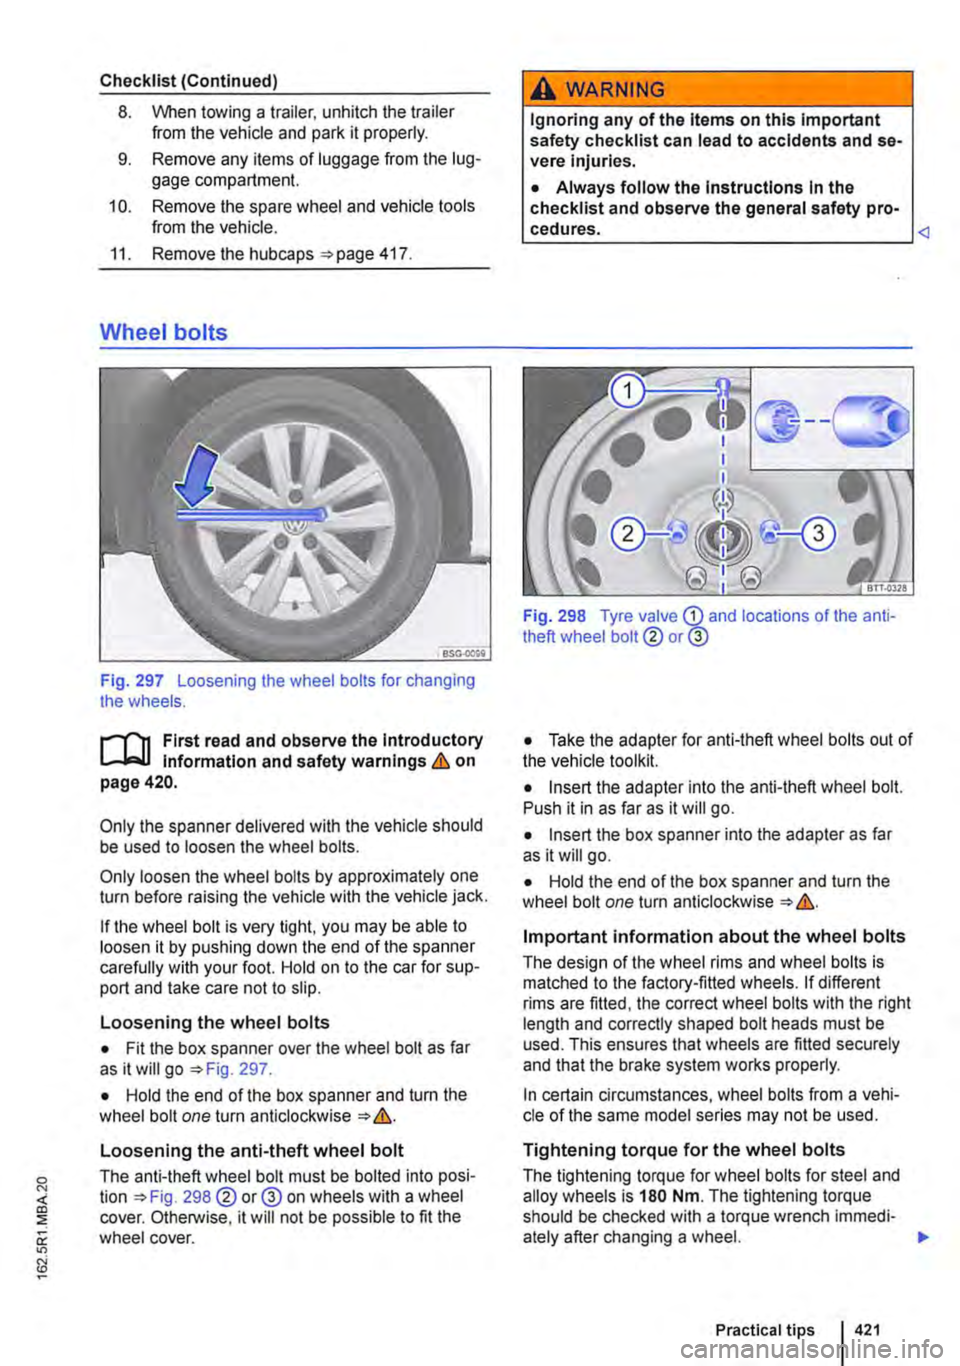 VOLKSWAGEN TRANSPORTER 2013  Owners Manual Checklist (Continued) 
8. VI/hen towing a trailer, unhitch the trailer from the vehicle and park it properly. 
9. Remove any items of luggage from the lug-gage compartment. 
10. Remove the spare wheel